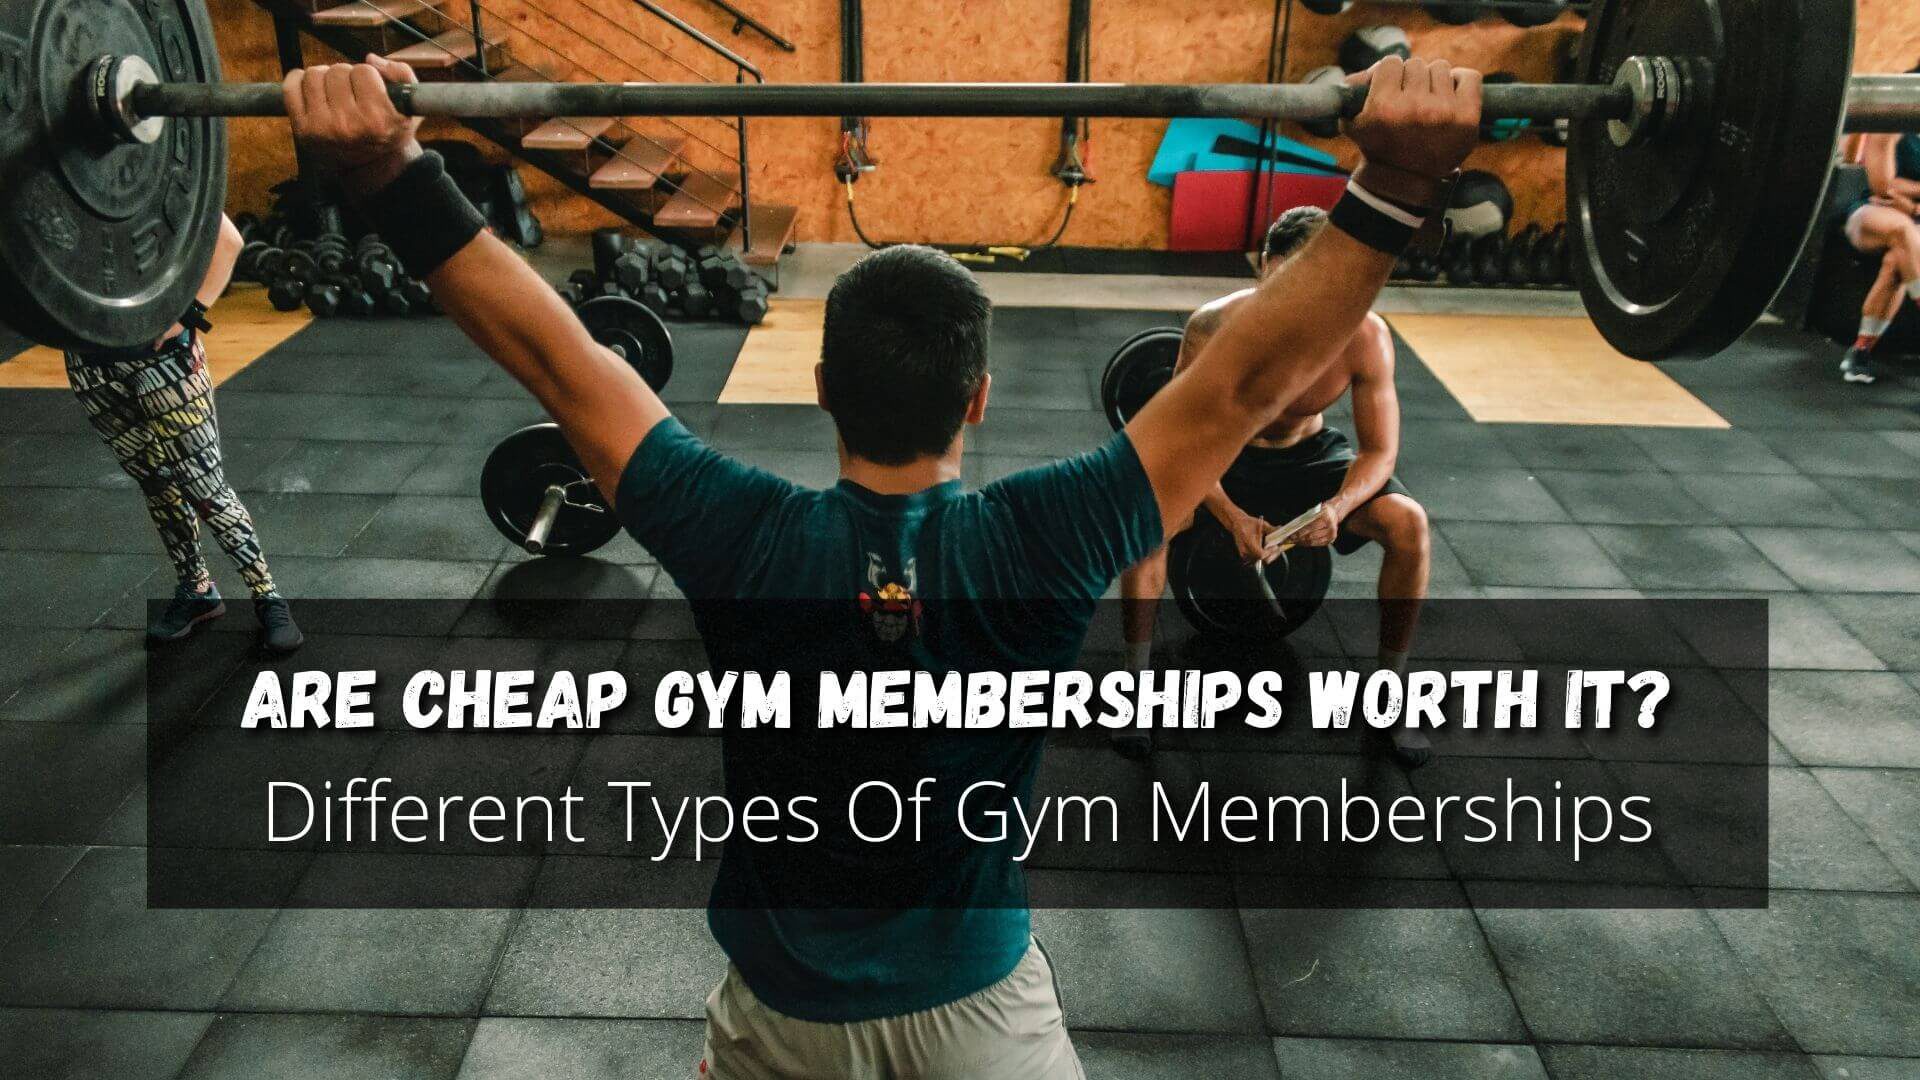 Do cheap gym memberships offer good value? Here's why offering different types of gym memberships is beneficial and worth considering.